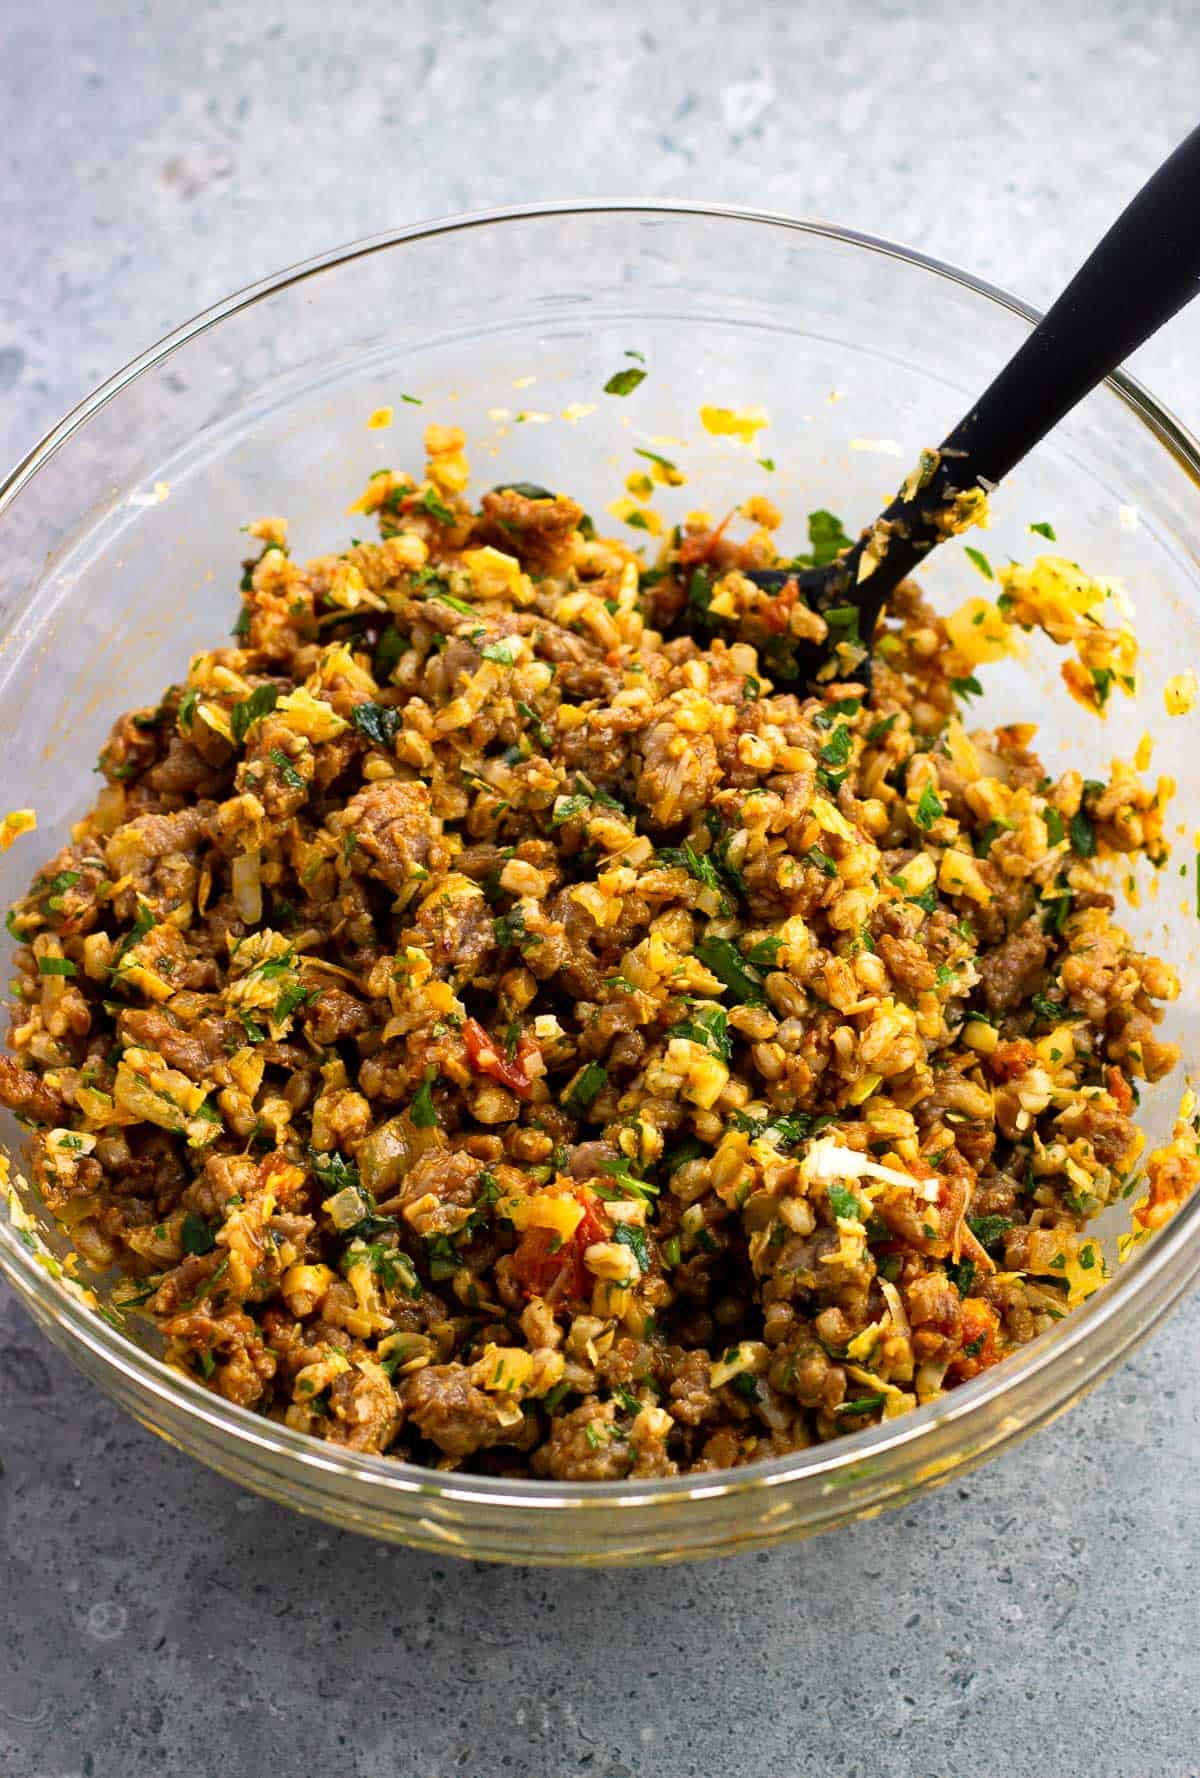 The farro and sausage filling mixed together in a bowl.